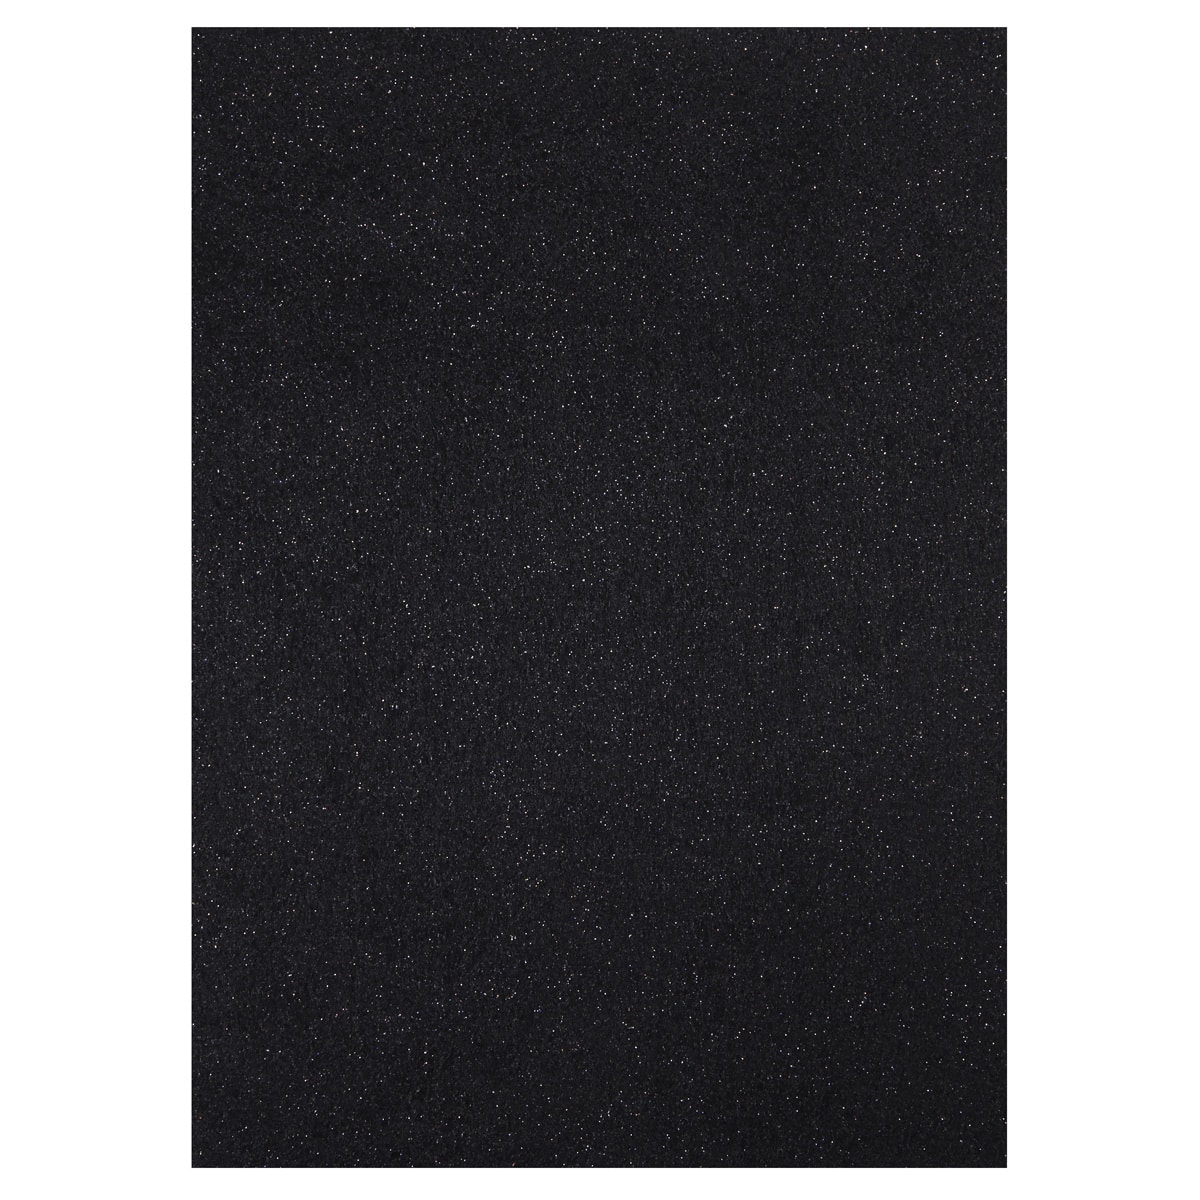 Black Fine Glitter High Gloss Jelly Canvas Crafting Sheets